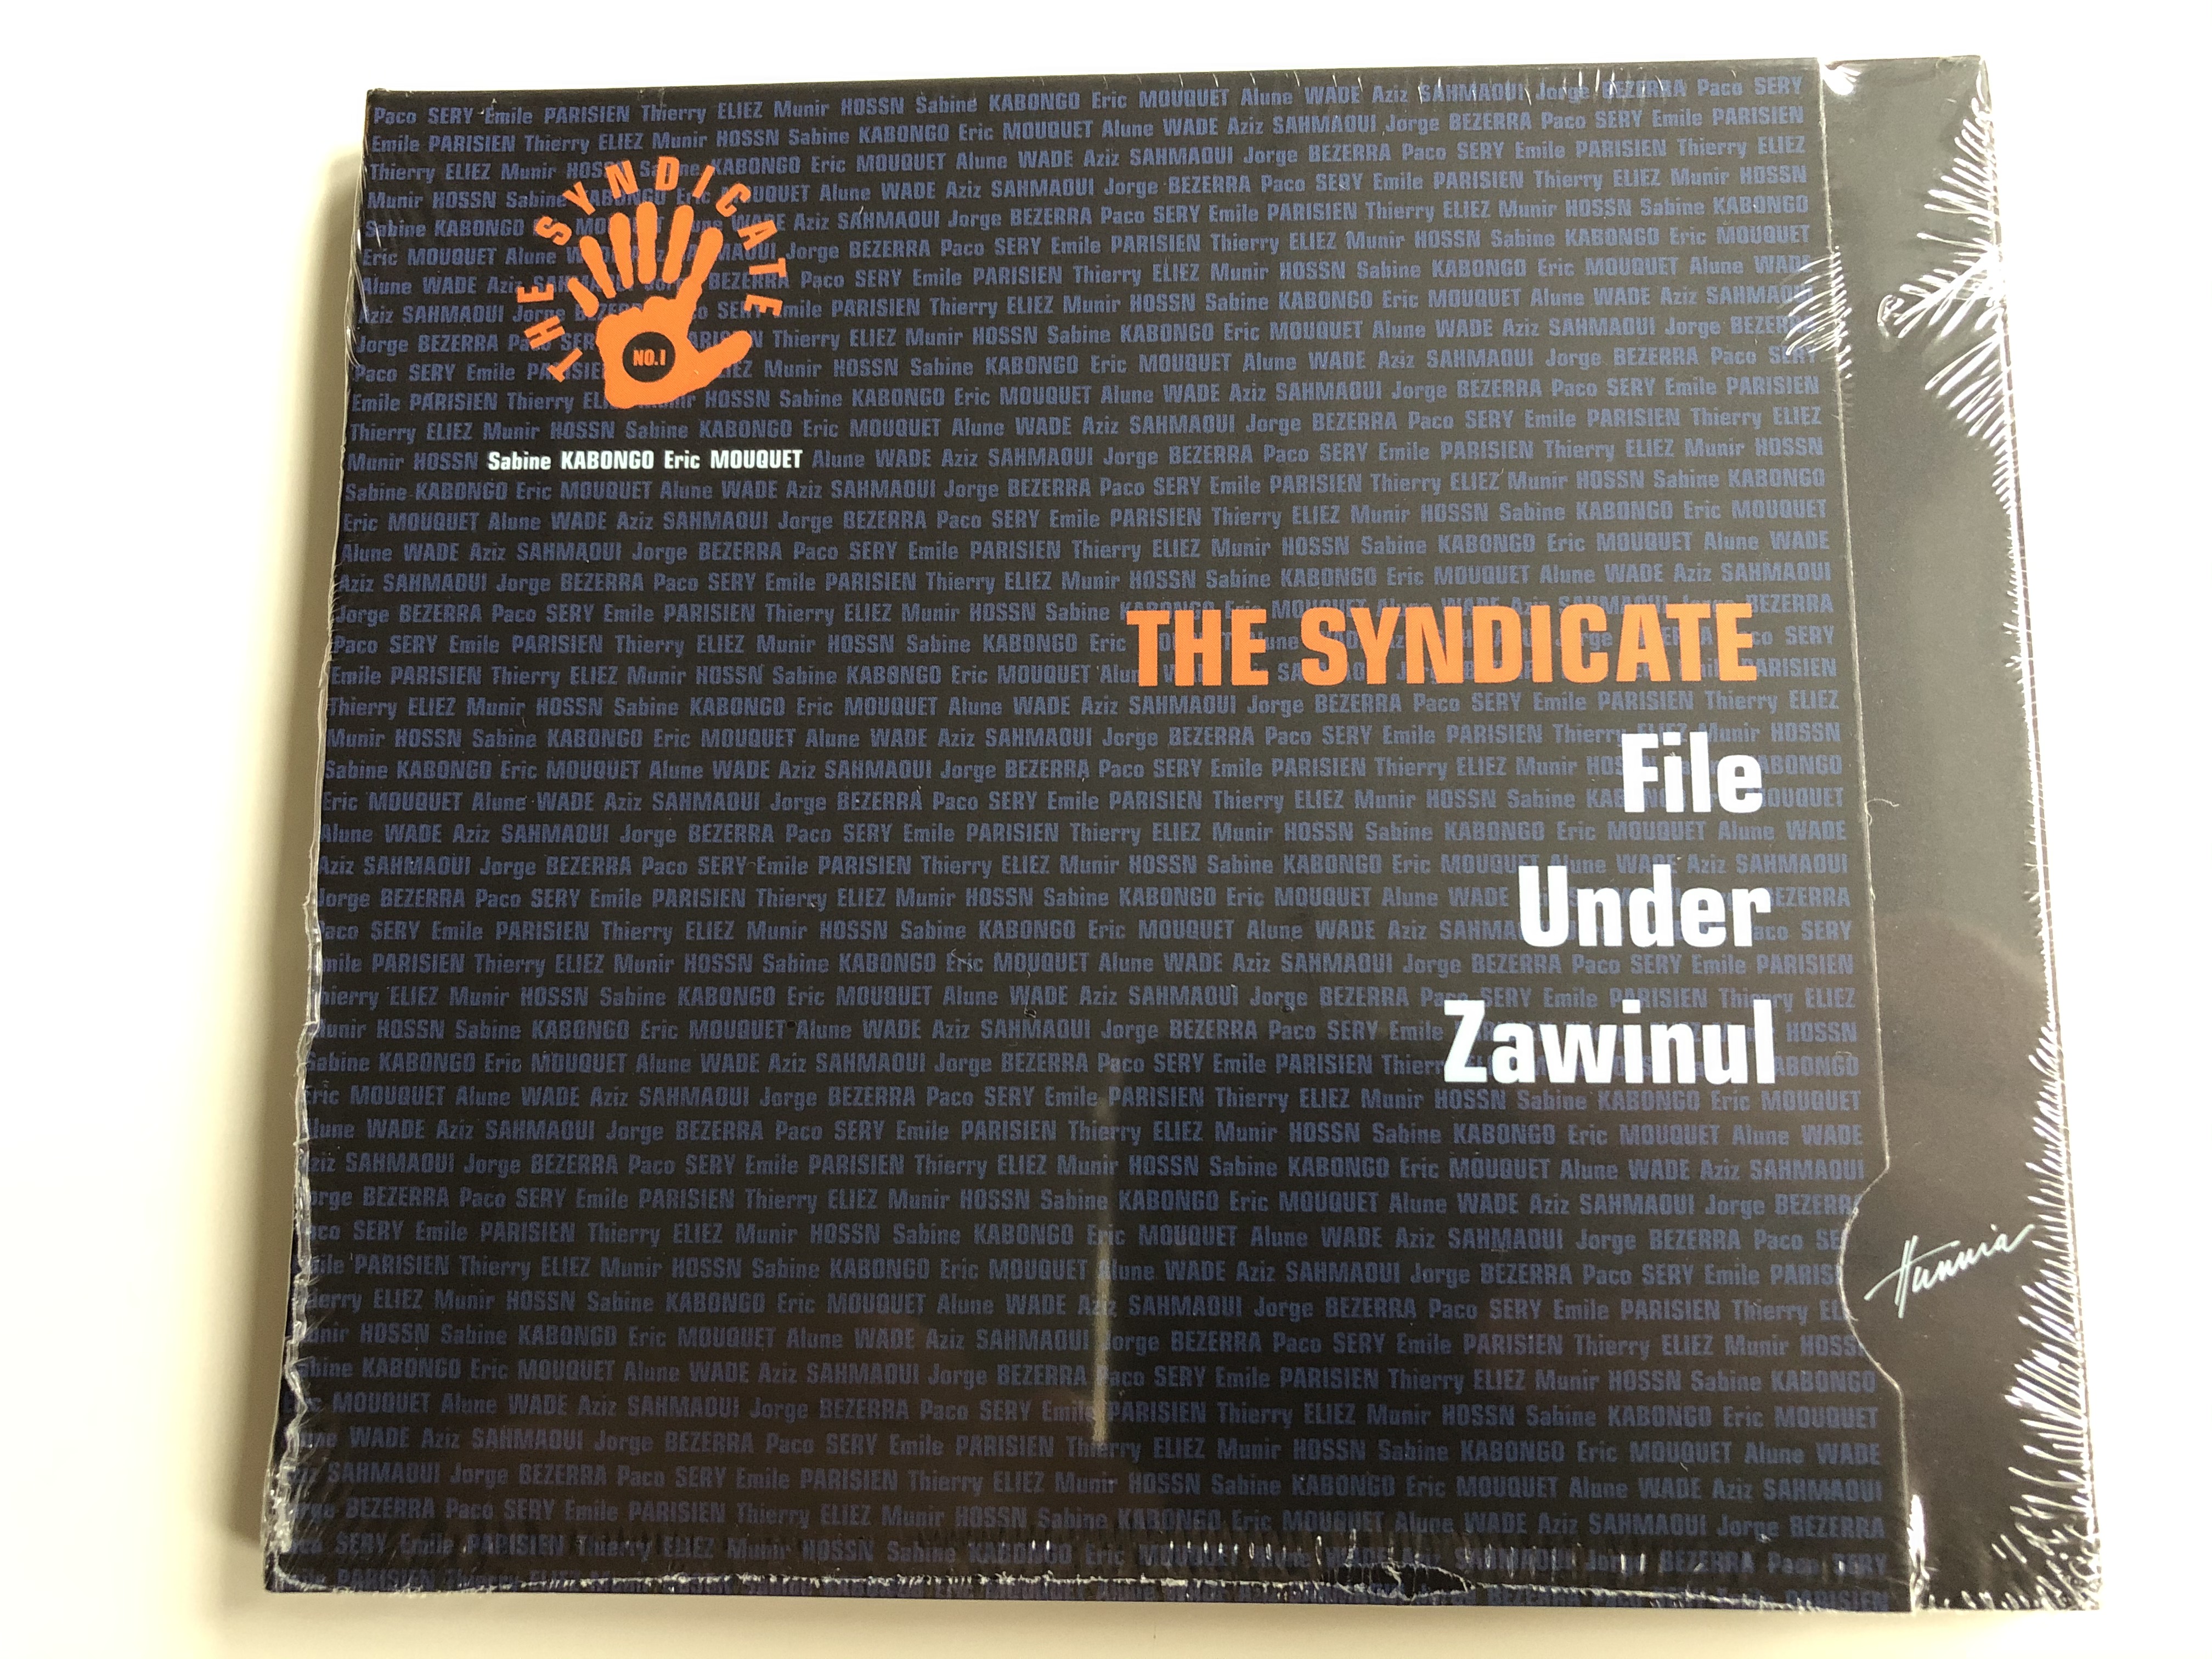 the-syndicate-file-under-zawinul-hunnia-records-film-production-audio-cd-2012-hrcd-1201-1-.jpg